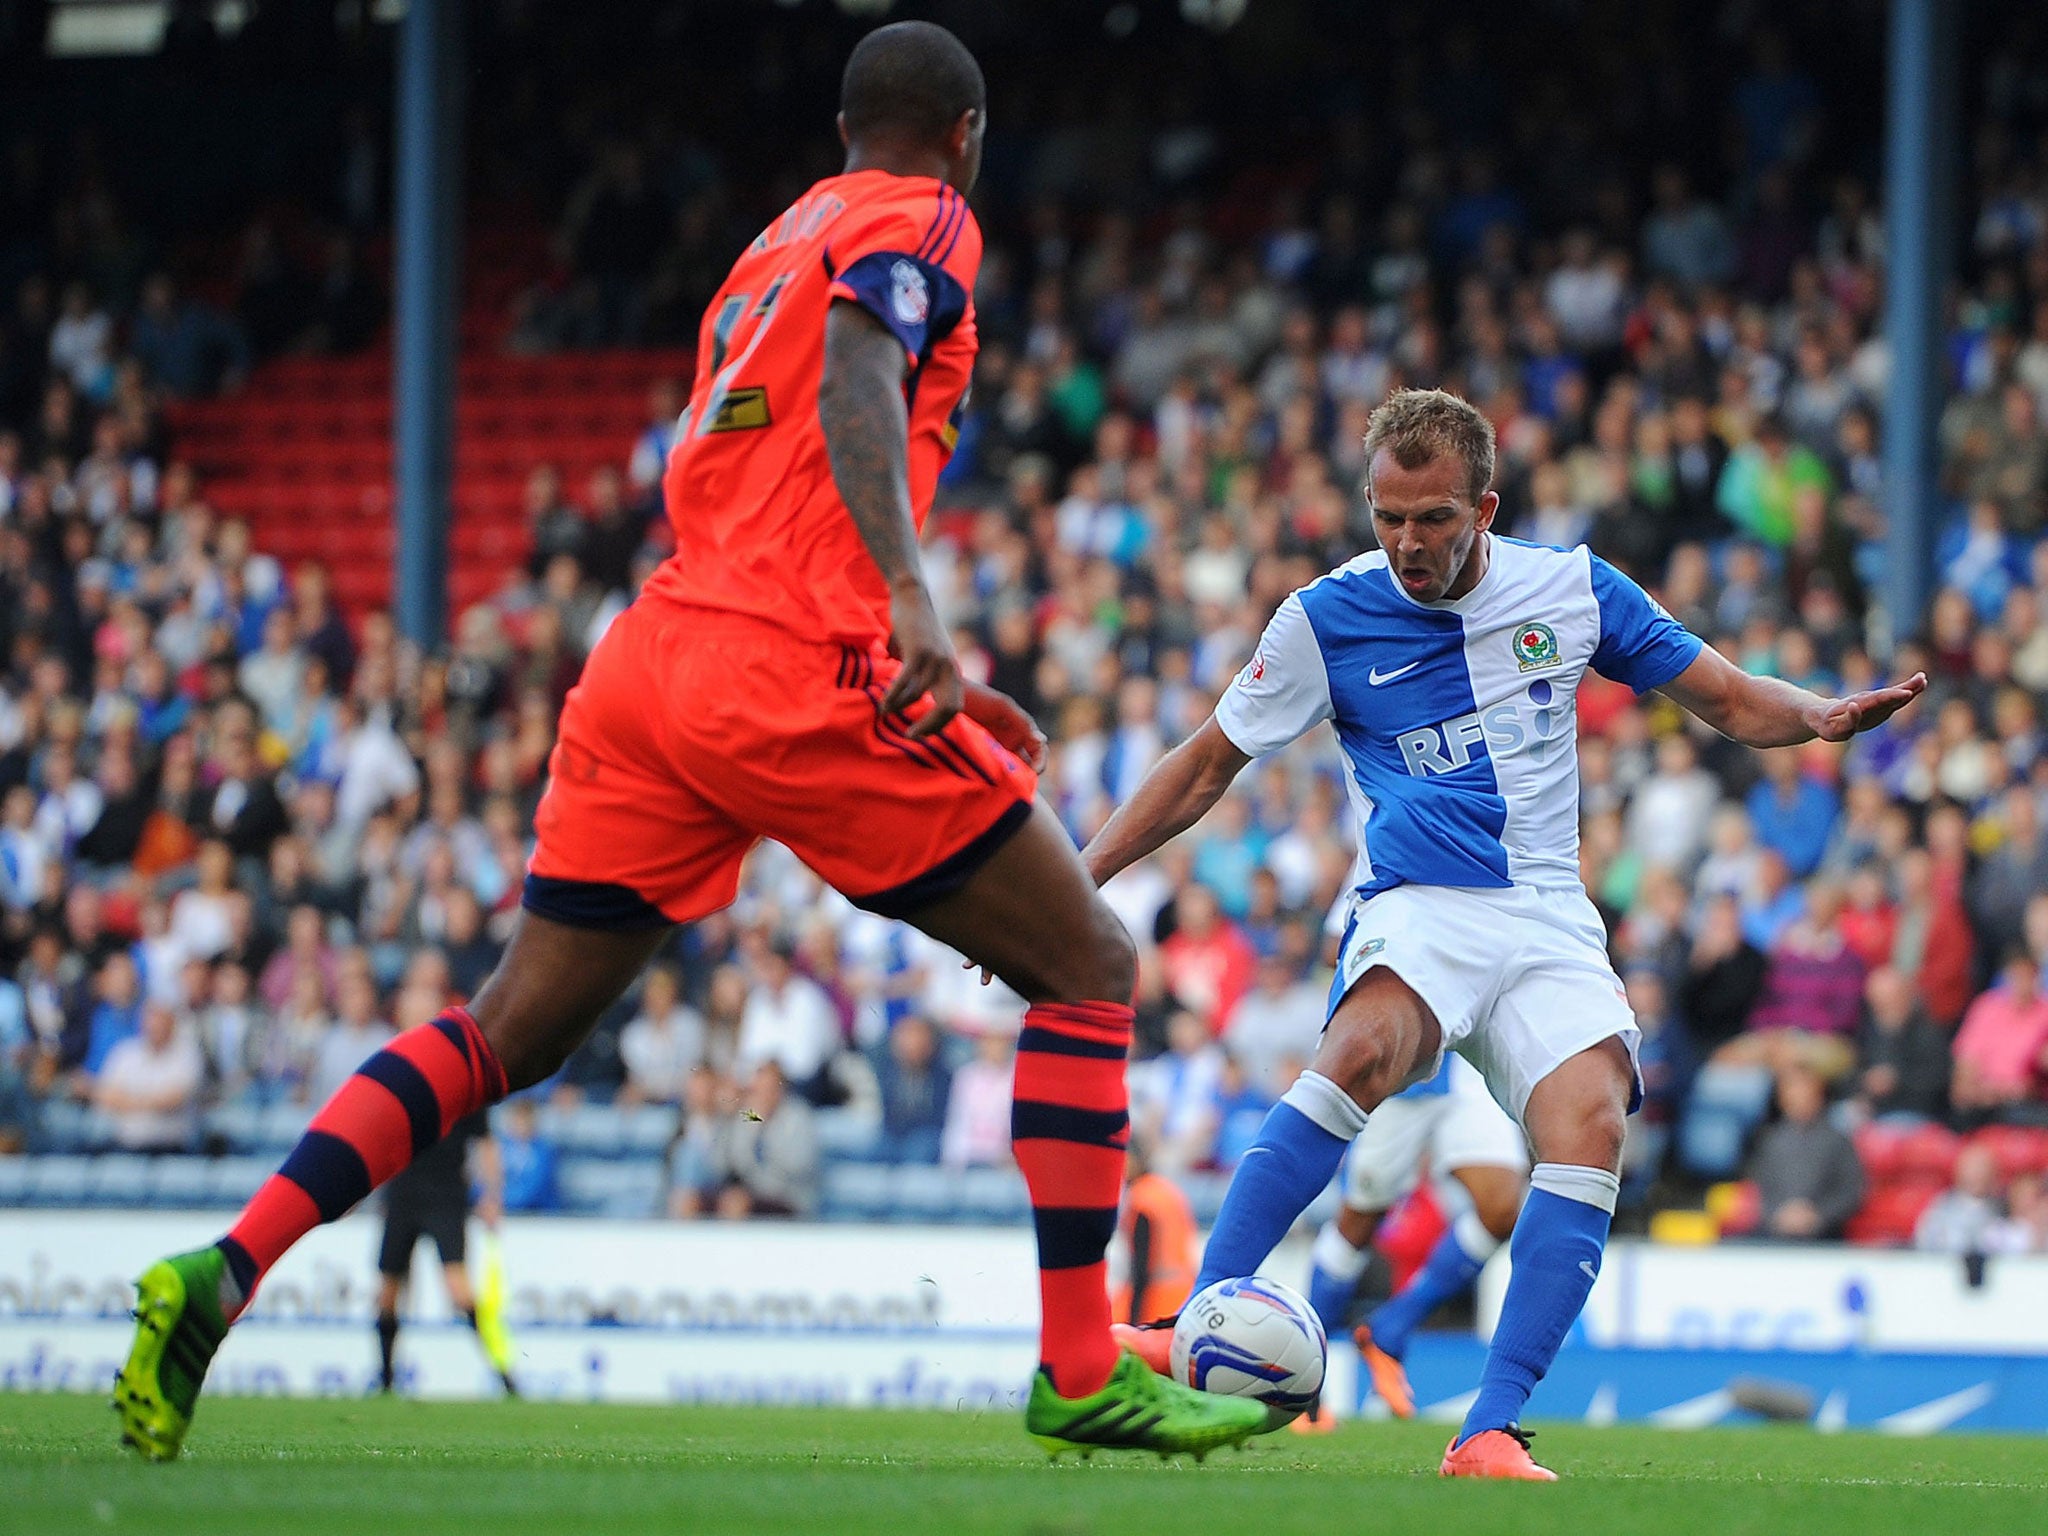 Jordan Rhodes scores the first of his two goals on Saturday